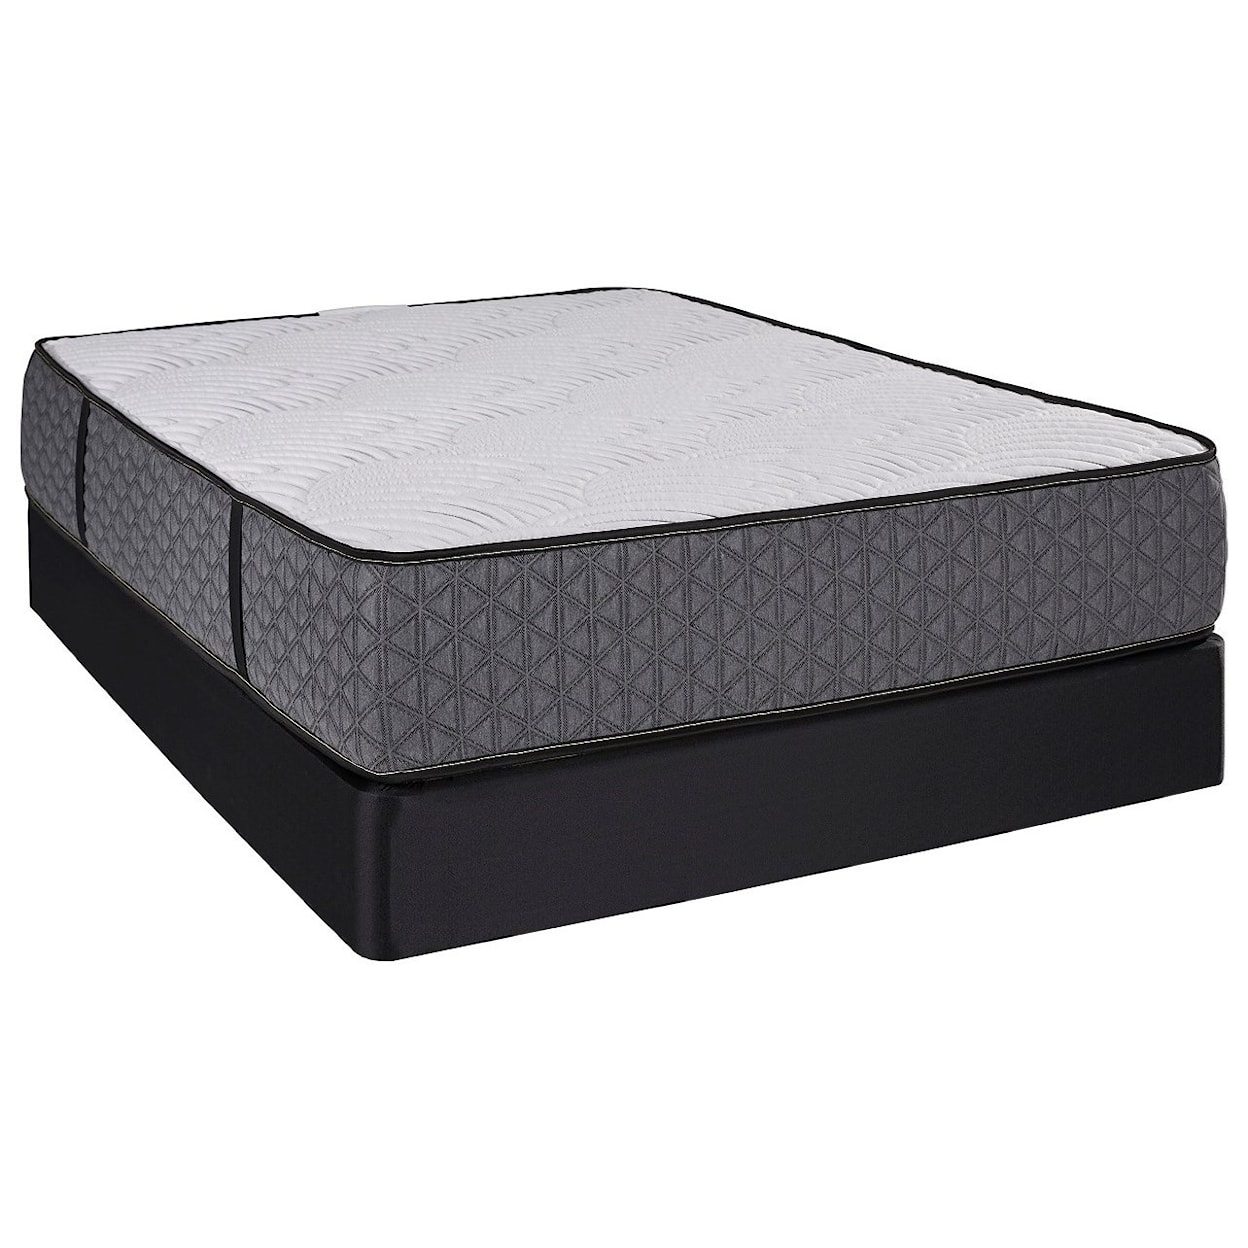 Restonic Aphrodite Firm Full Pocketed Coil Mattress Set